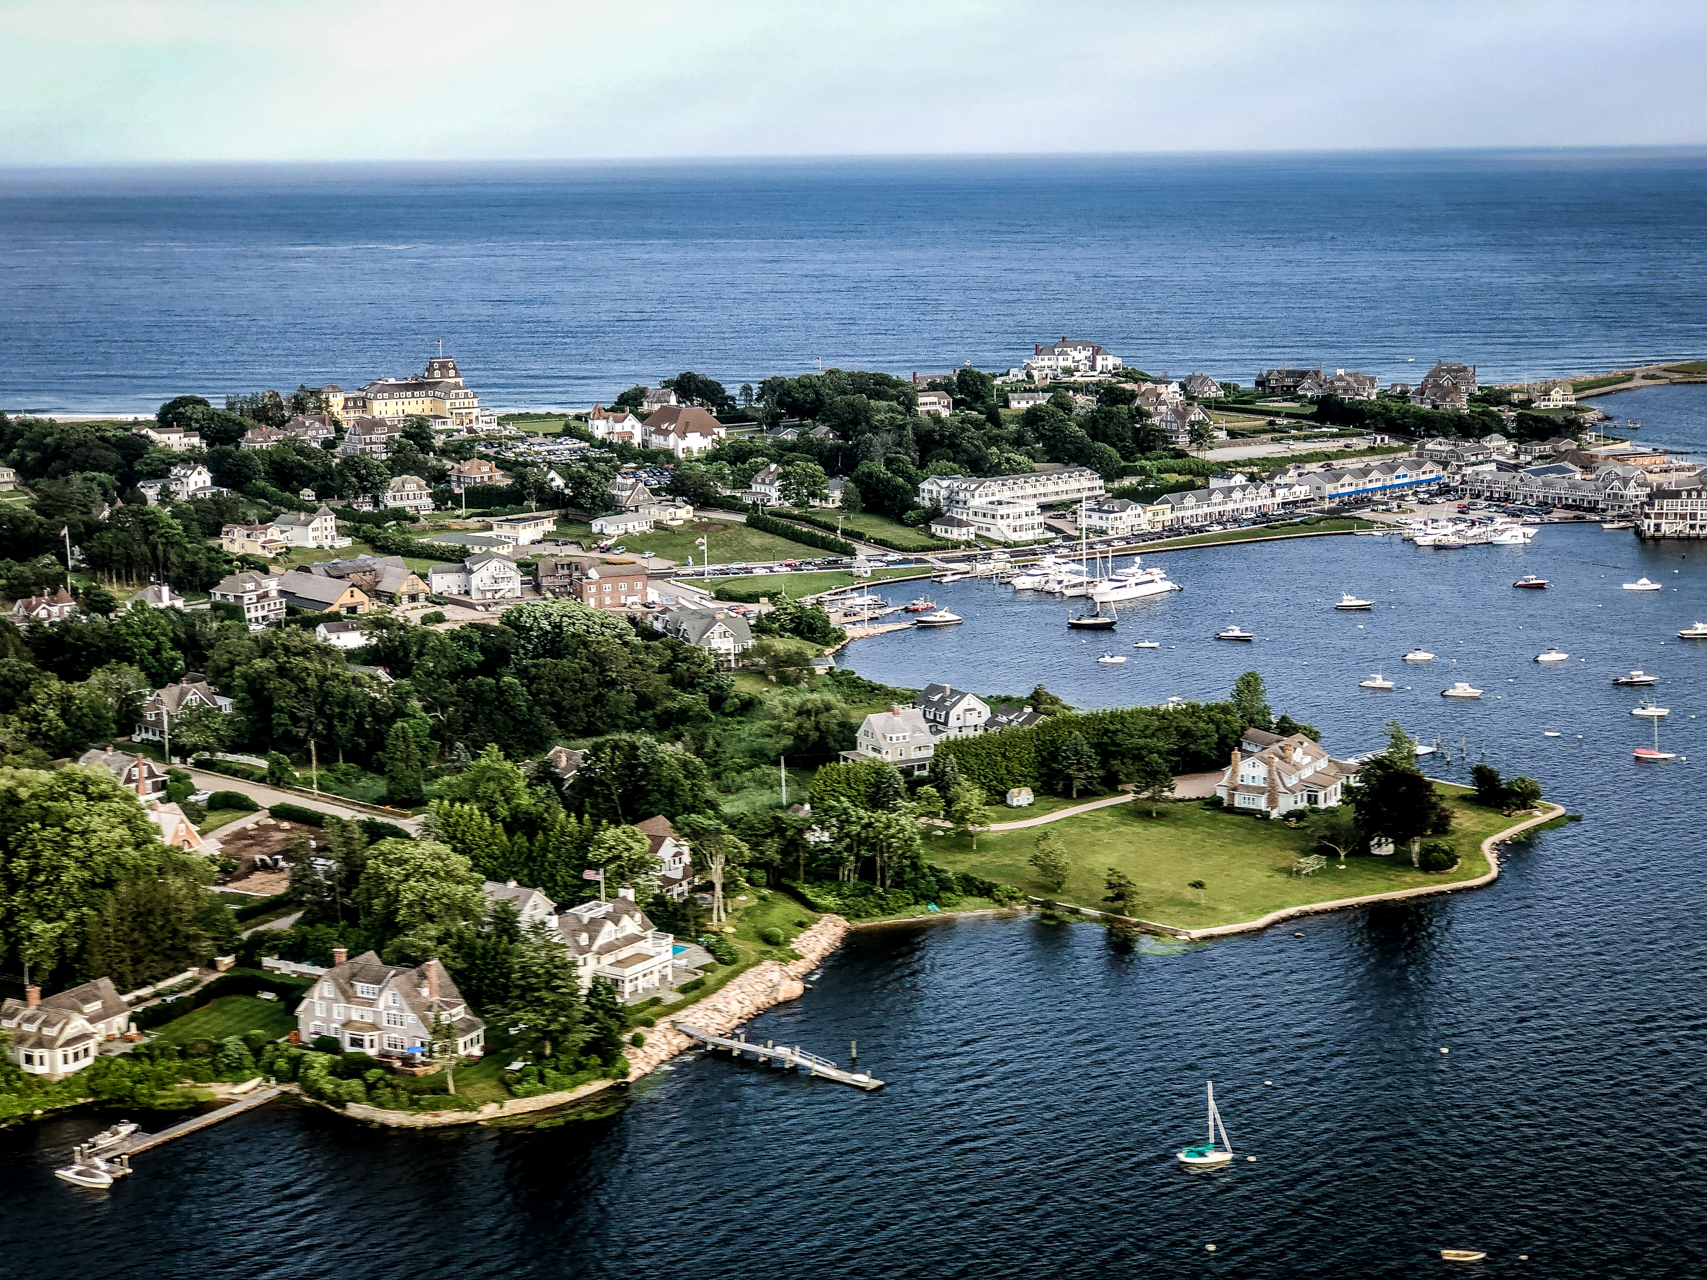 Top 10 Things to do In Stonington CT